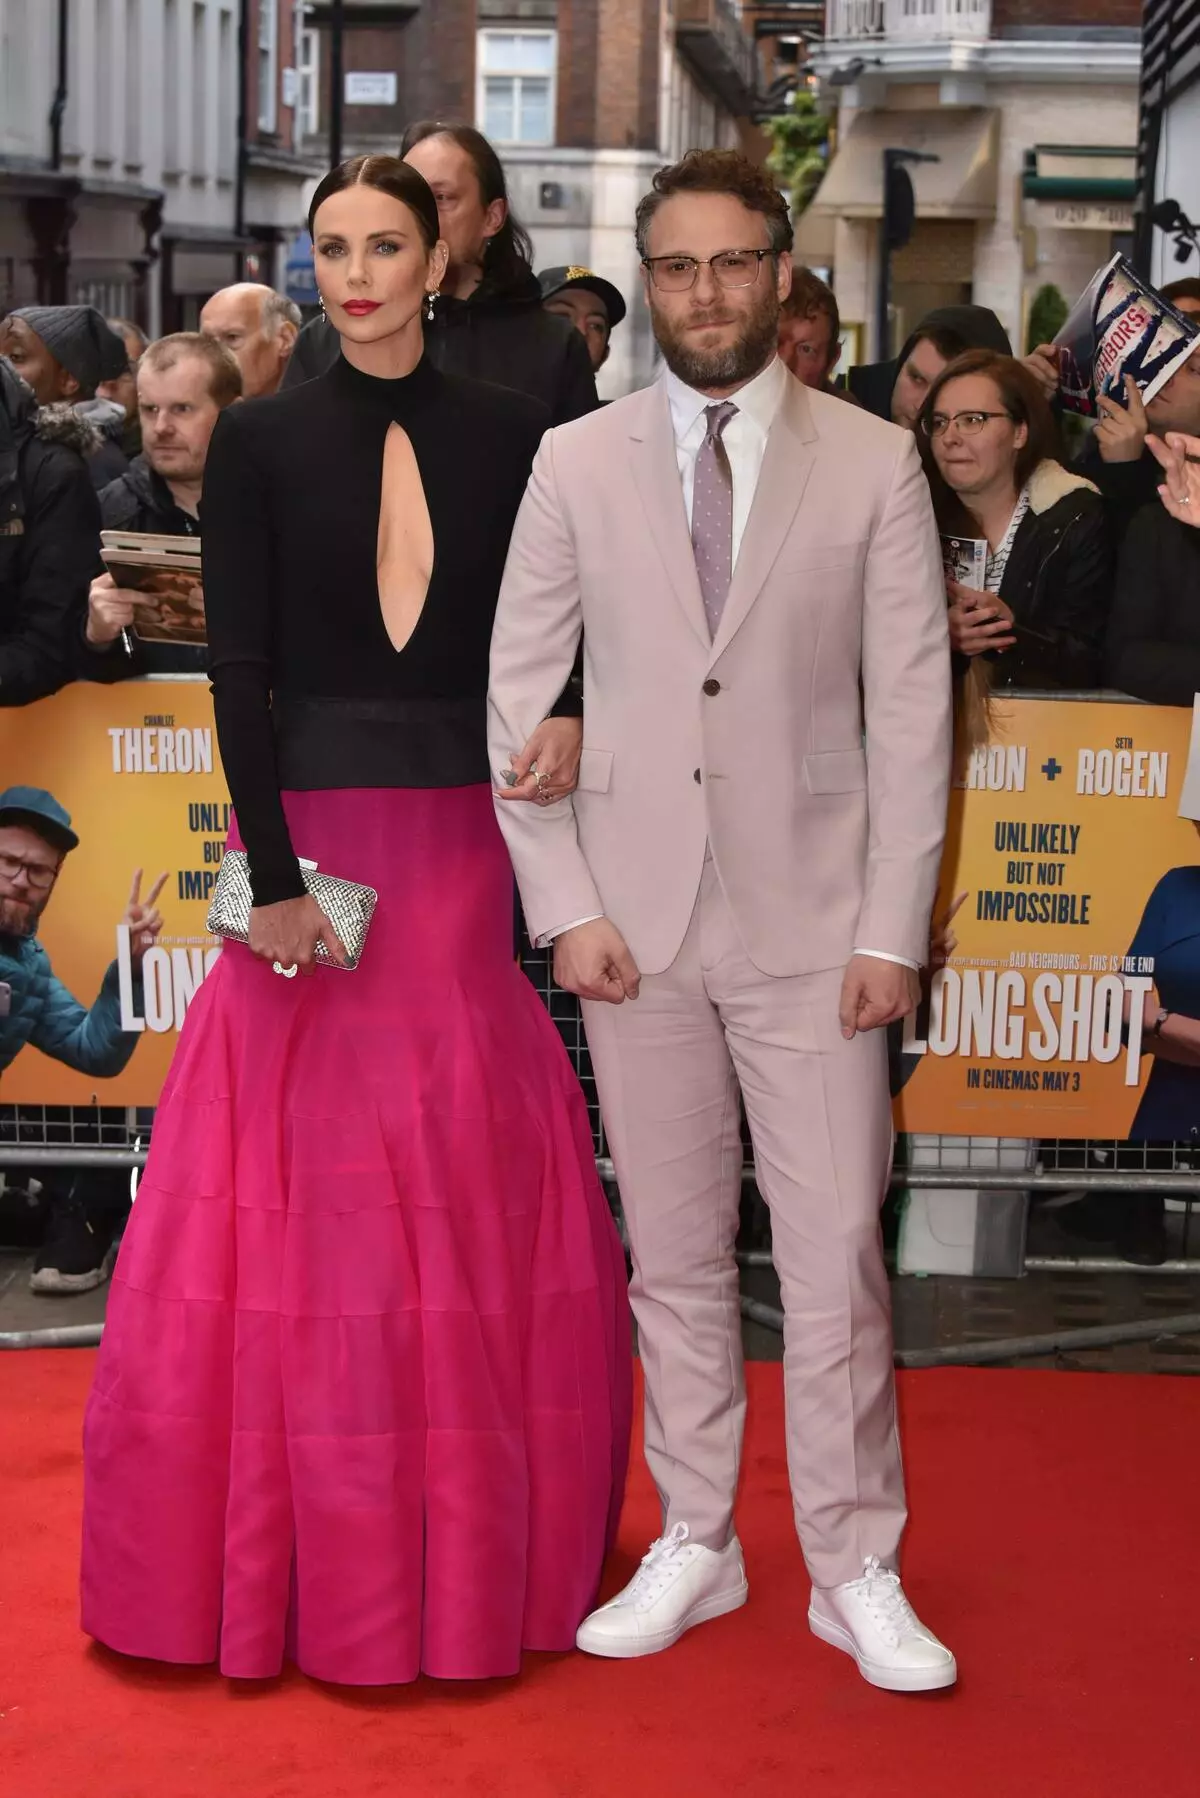 Photo: Charlize Theron and Seth Rogen at the premiere of the film 